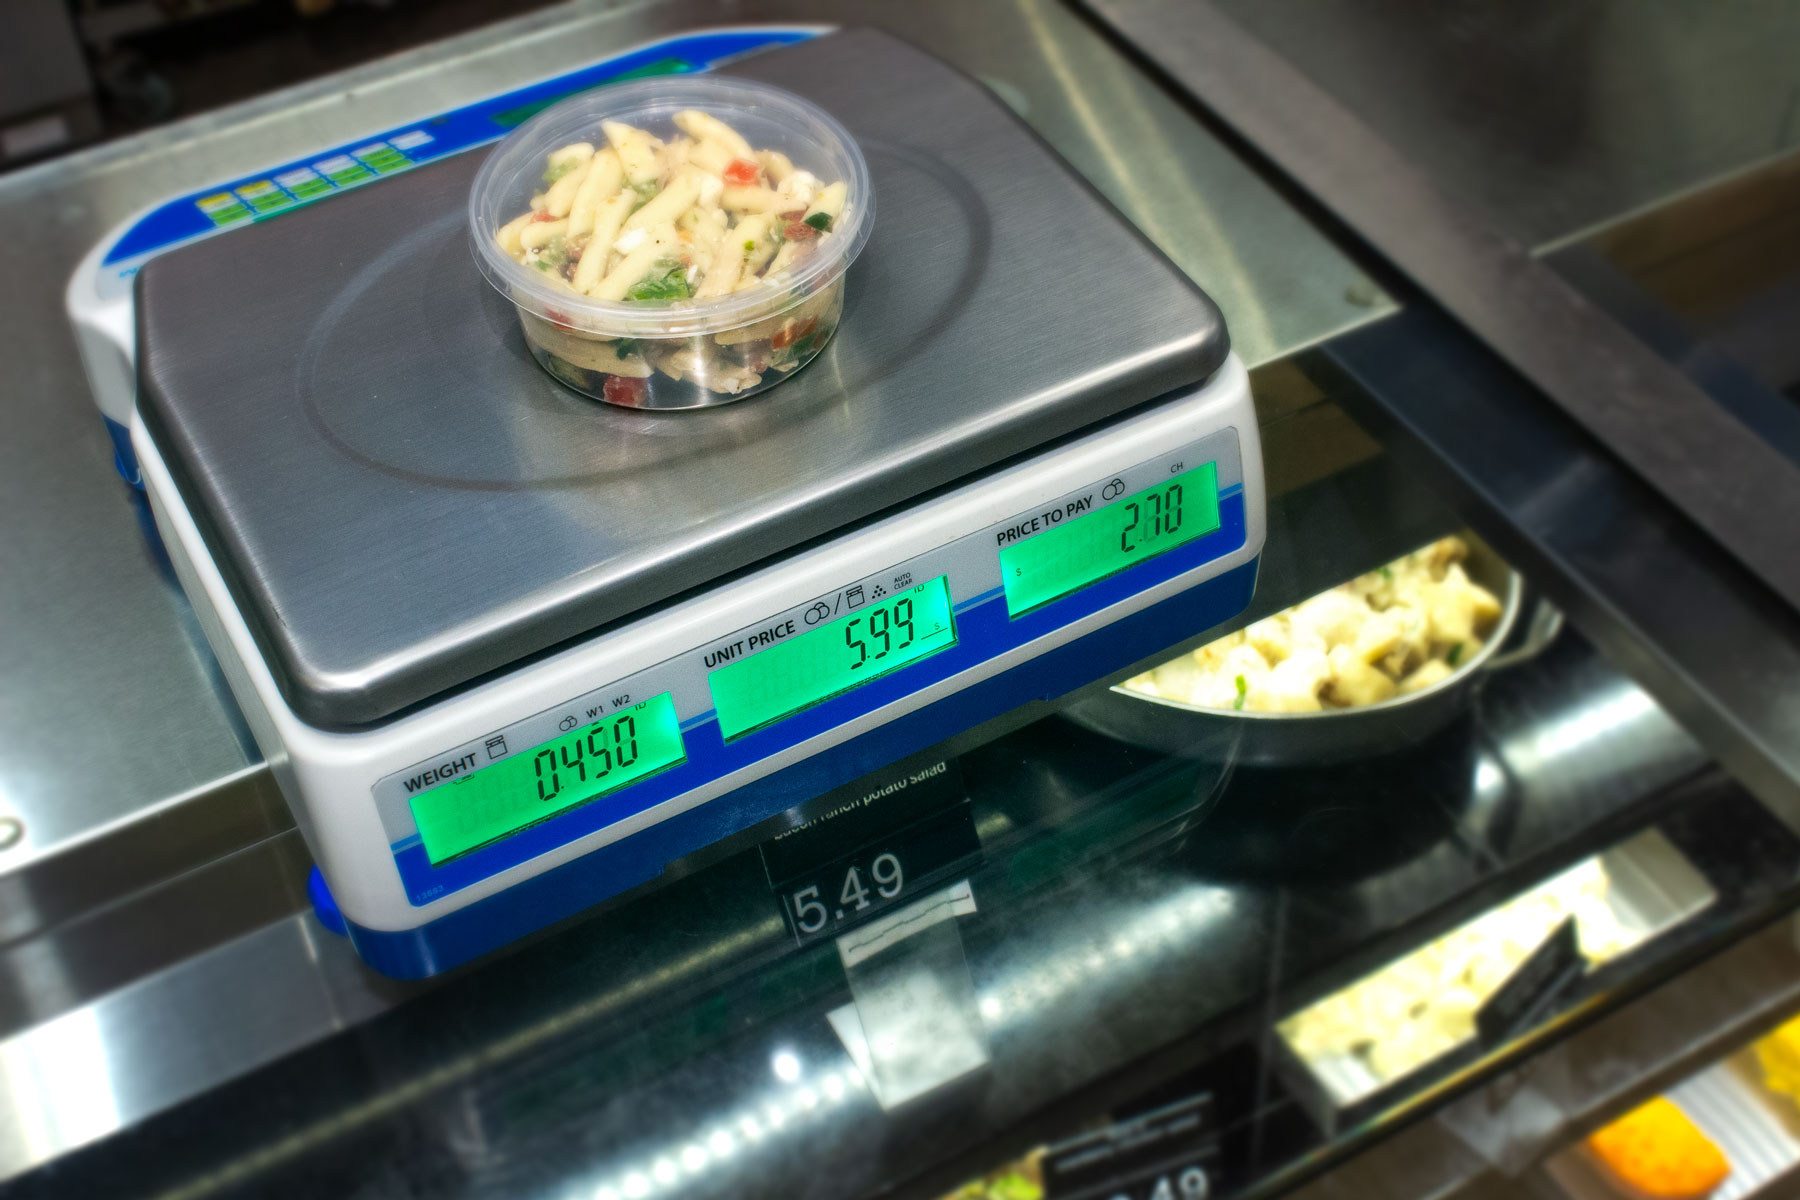 Swift Price Computing Retail Scale in use at a deli